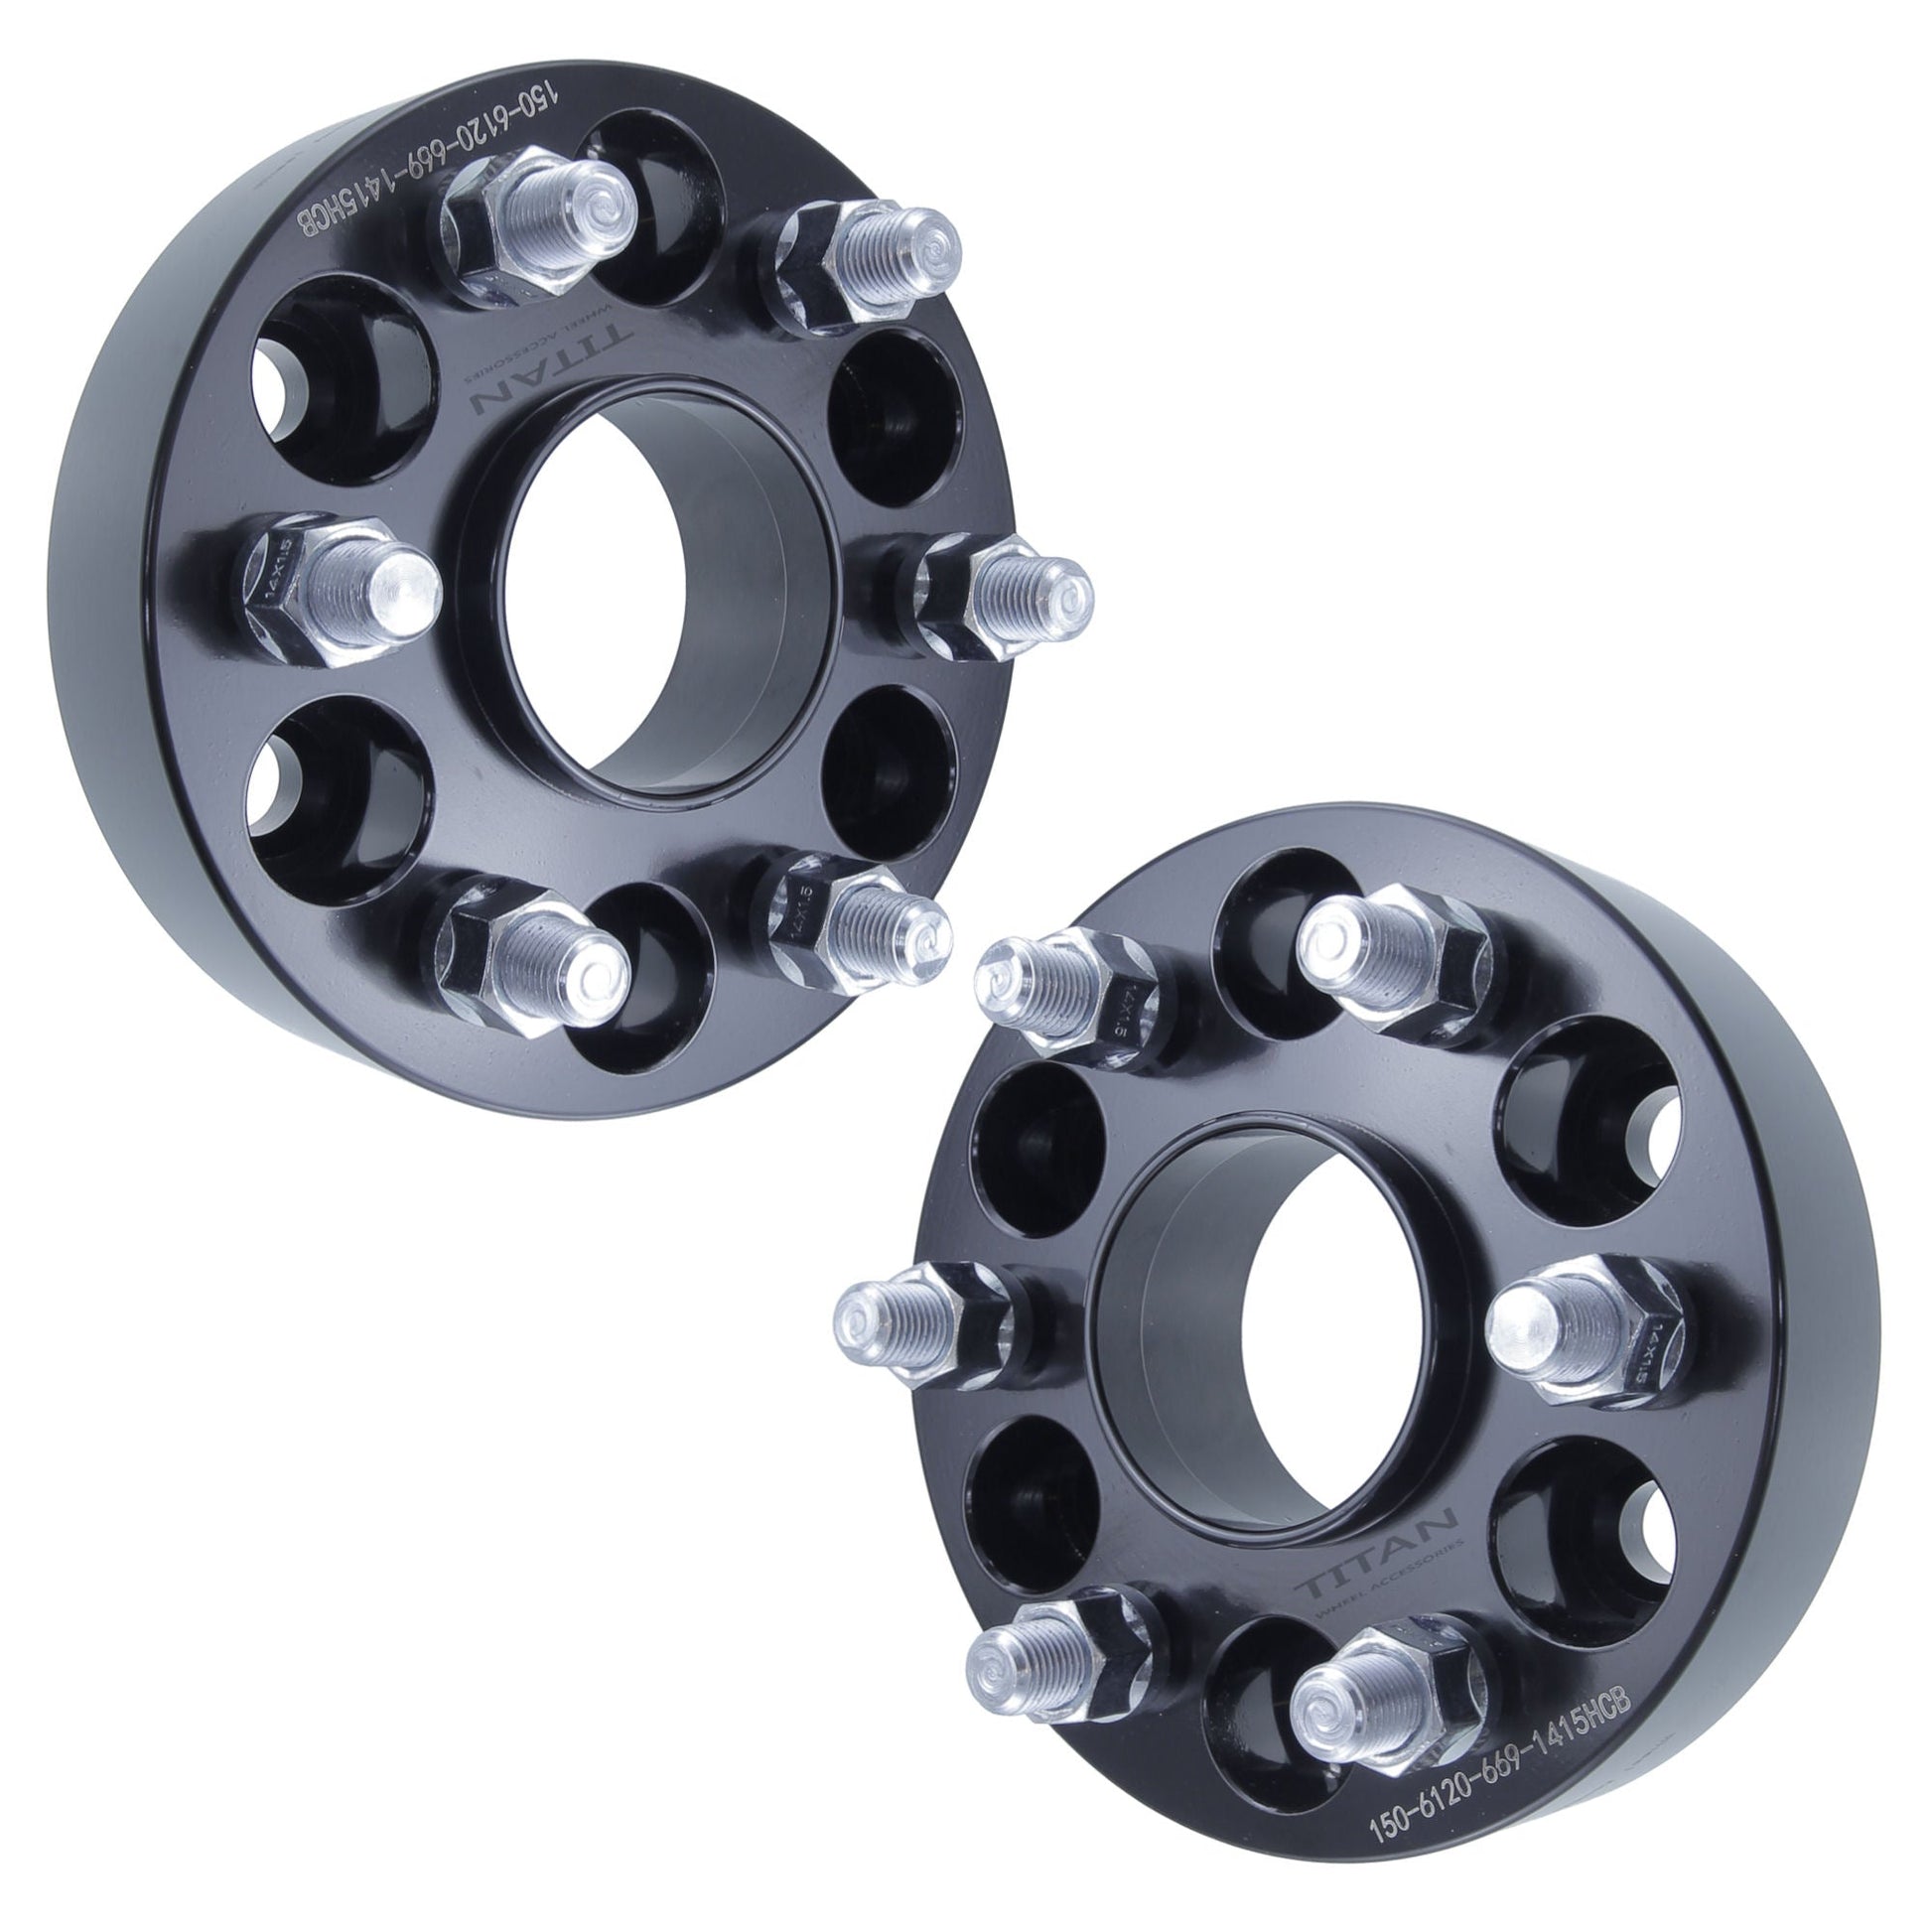 1.5" (38mm) Titan Wheel Spacers for Chevy Colorado GMC Canyon | 6x120 | 66.9 Hubcentric |14x1.5 Studs |  Set of 4 | Titan Wheel Accessories